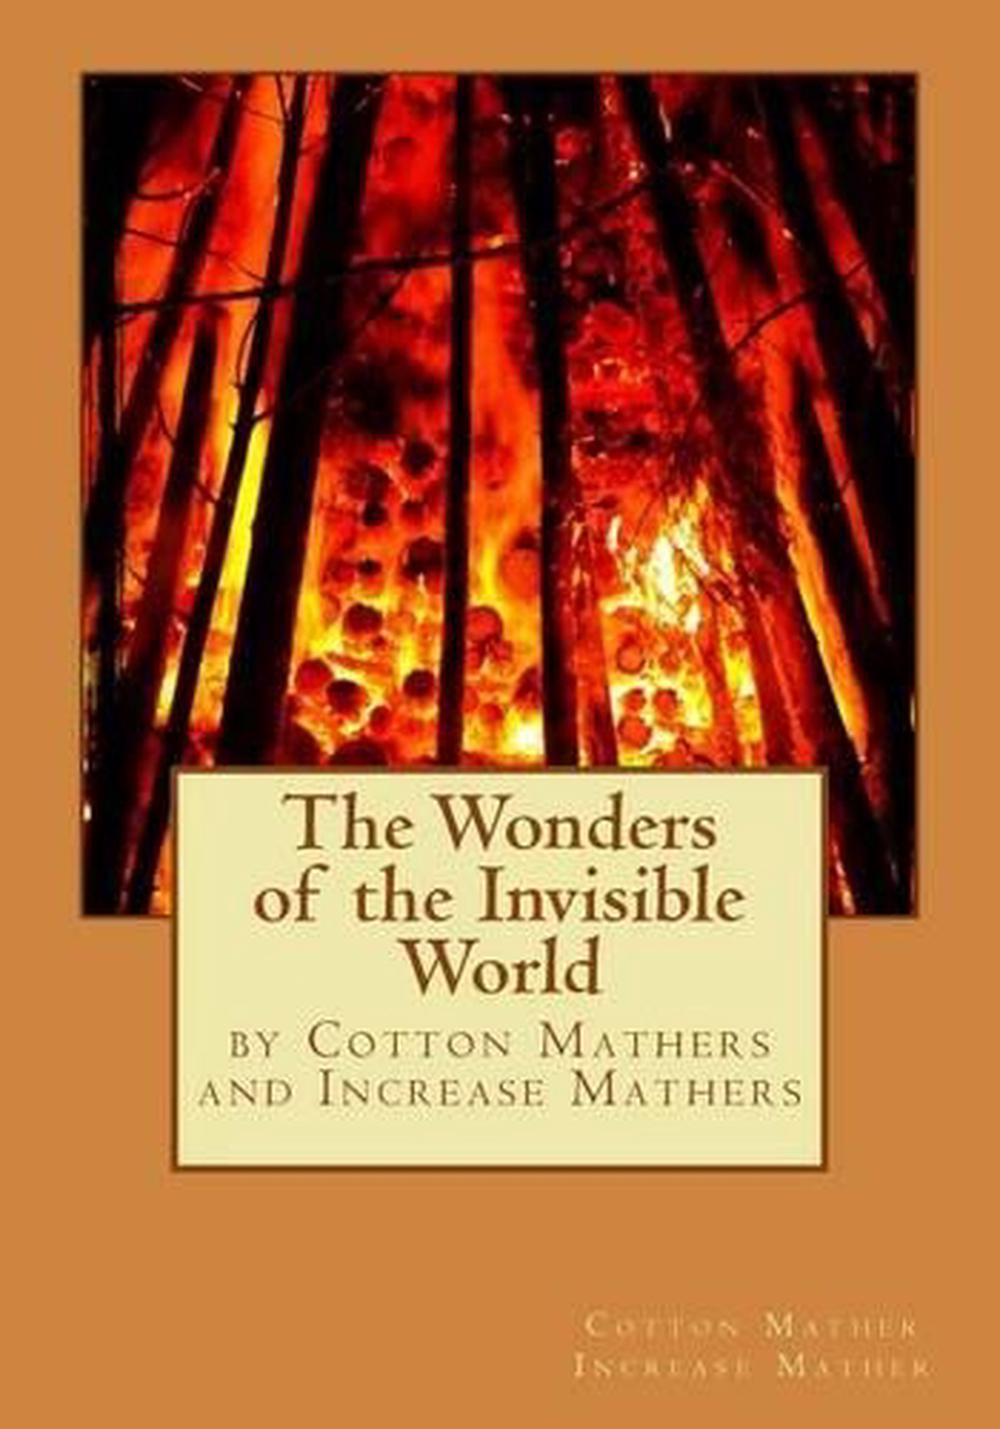 mather wonders of the invisible world